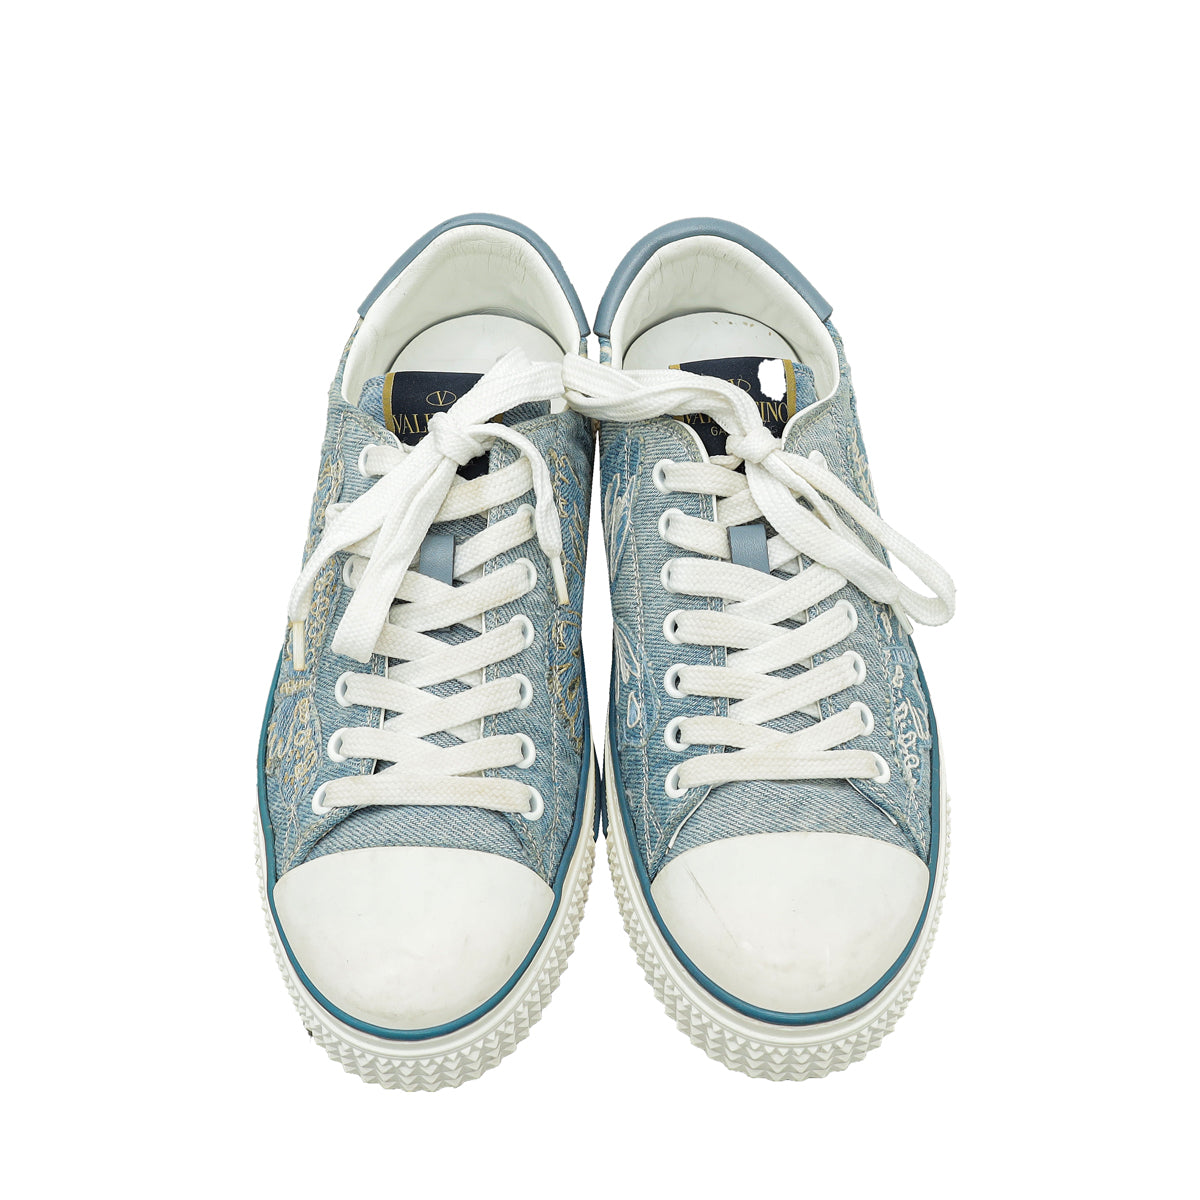 Valentino Bicolor Denim Butterfly Embroidered Sneakers 37